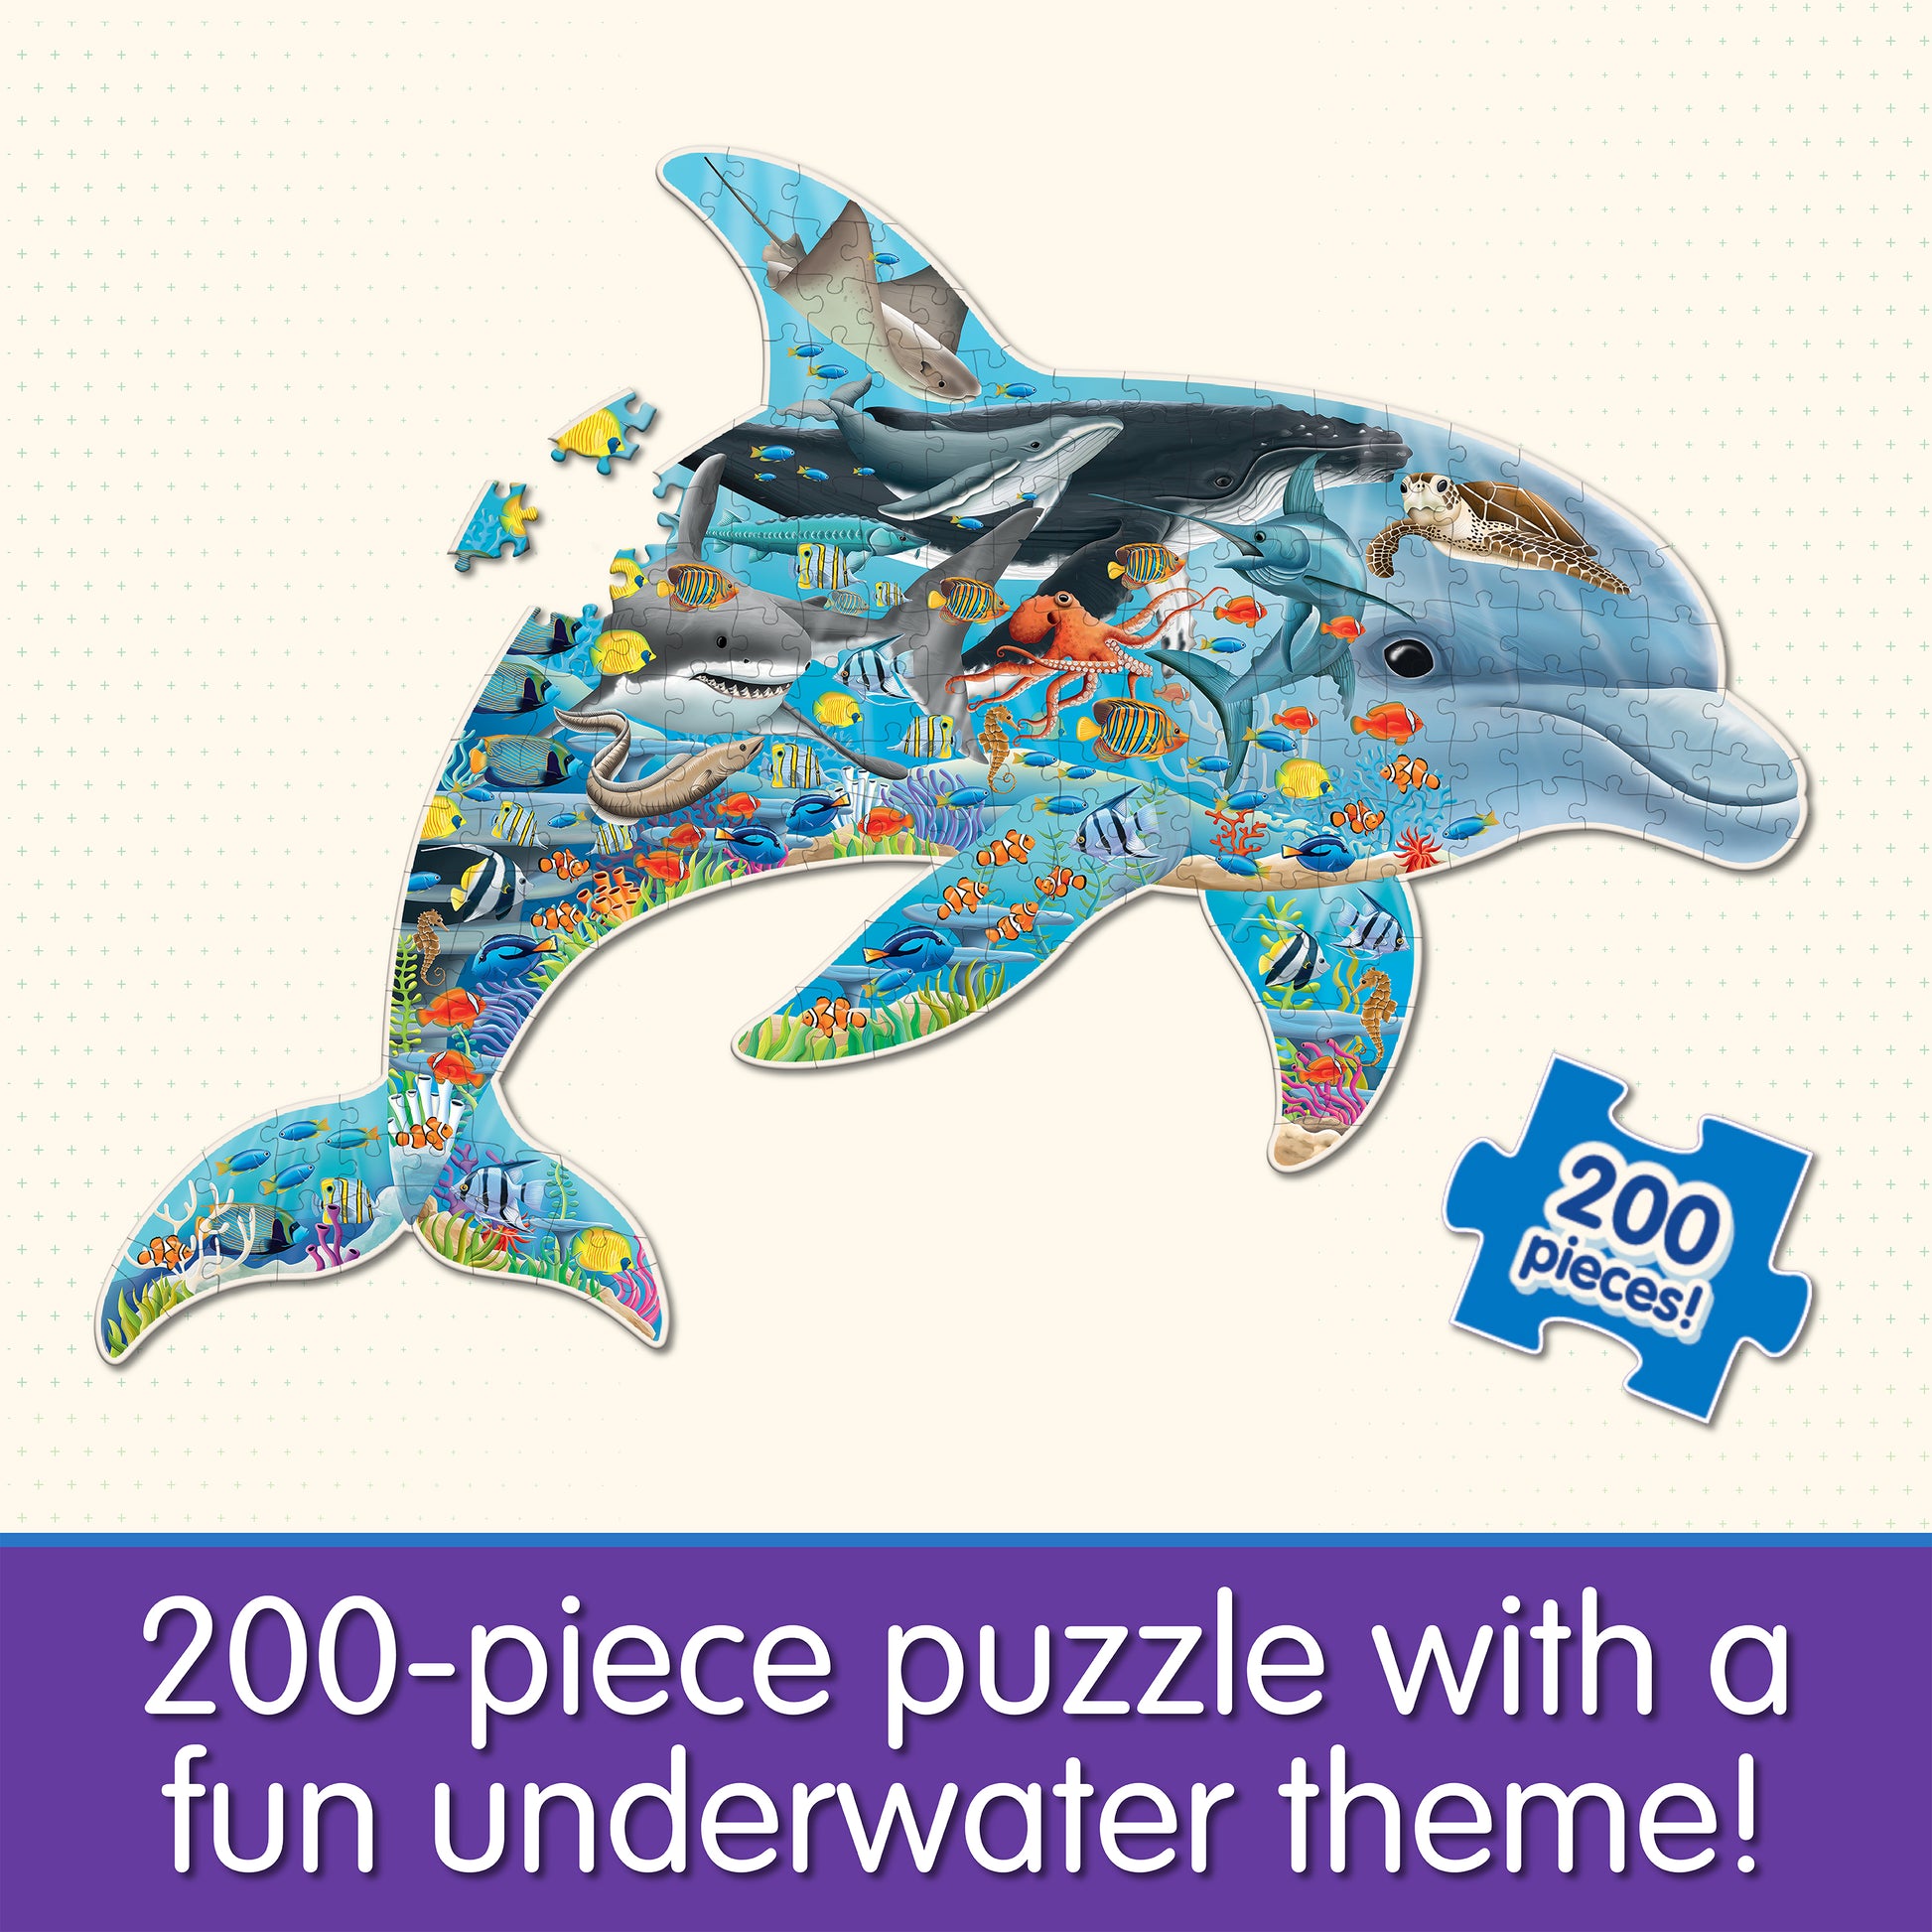 Infographic about Wildlife World Sea Life Puzzle that says, "200-piece puzzle with a fun underwater theme!"